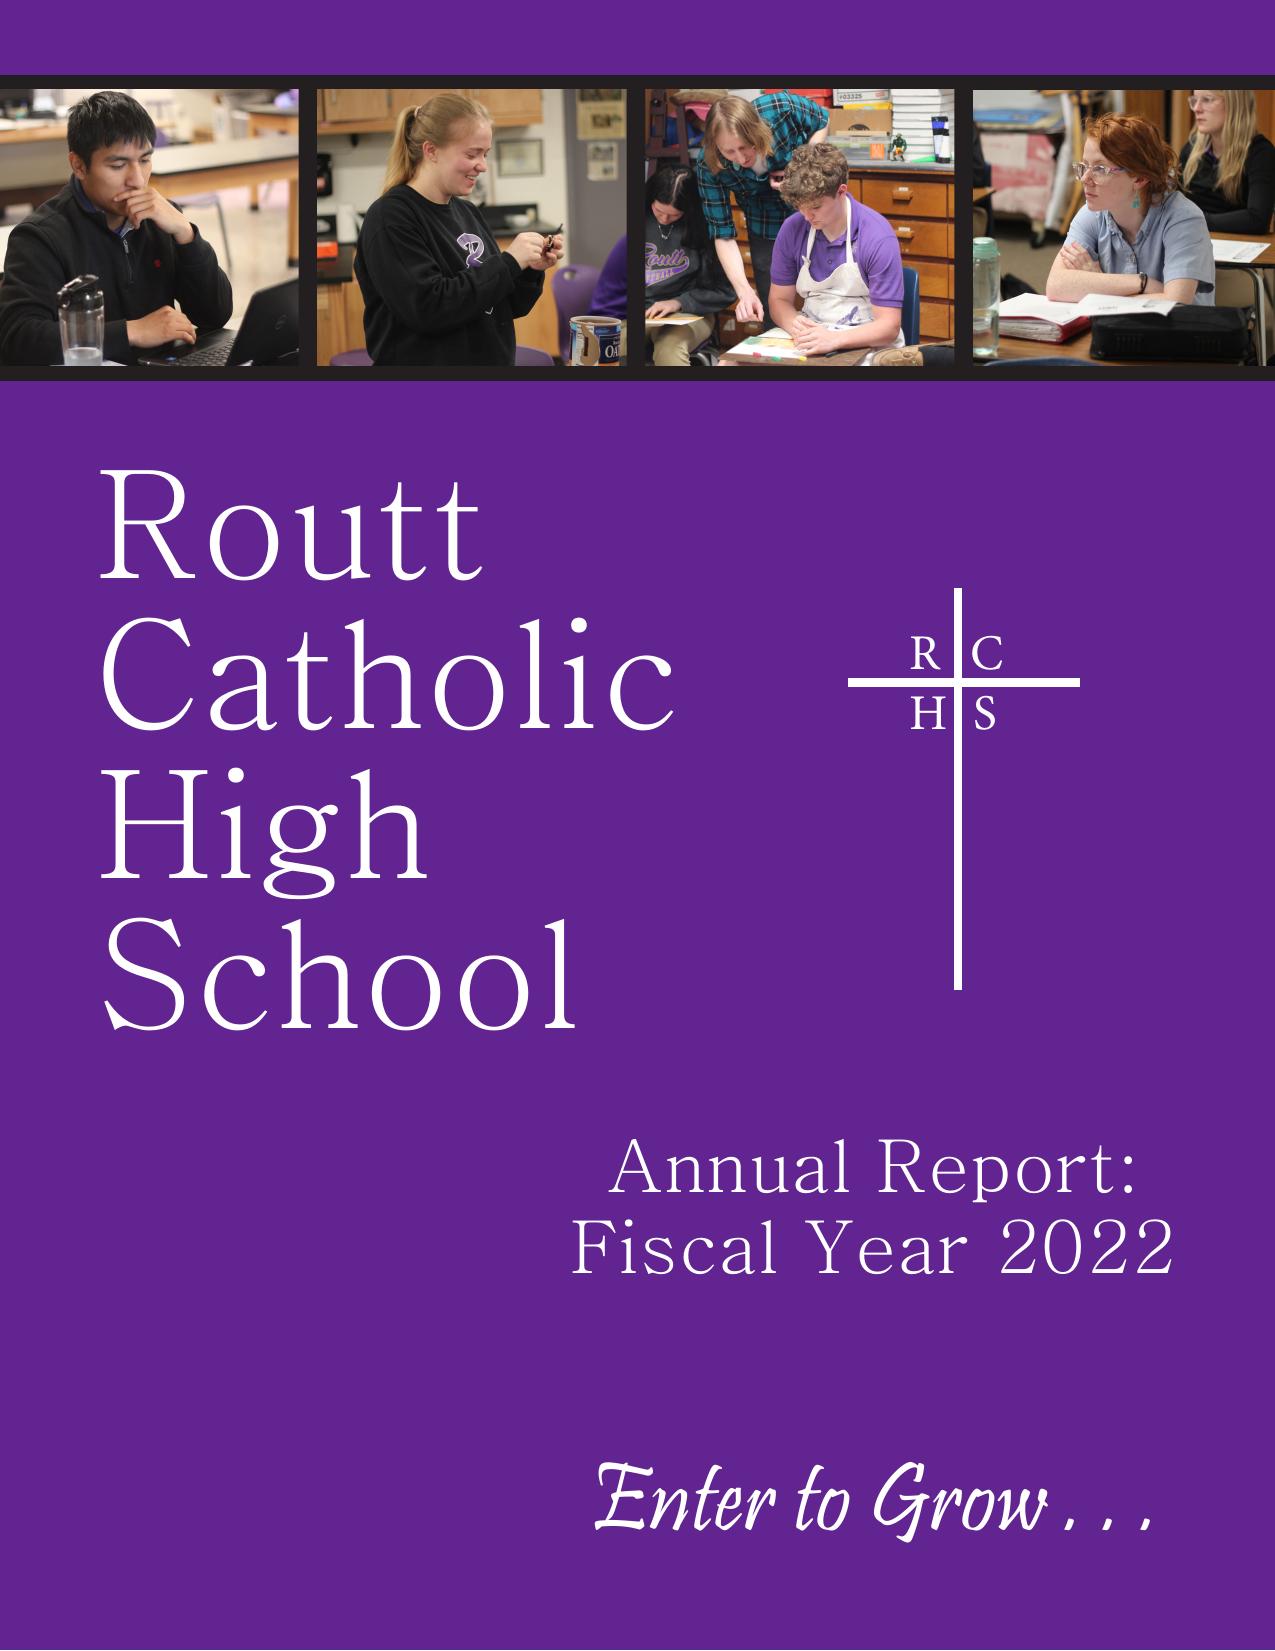 ROUTTCATHOLIC 2022 Annual Report